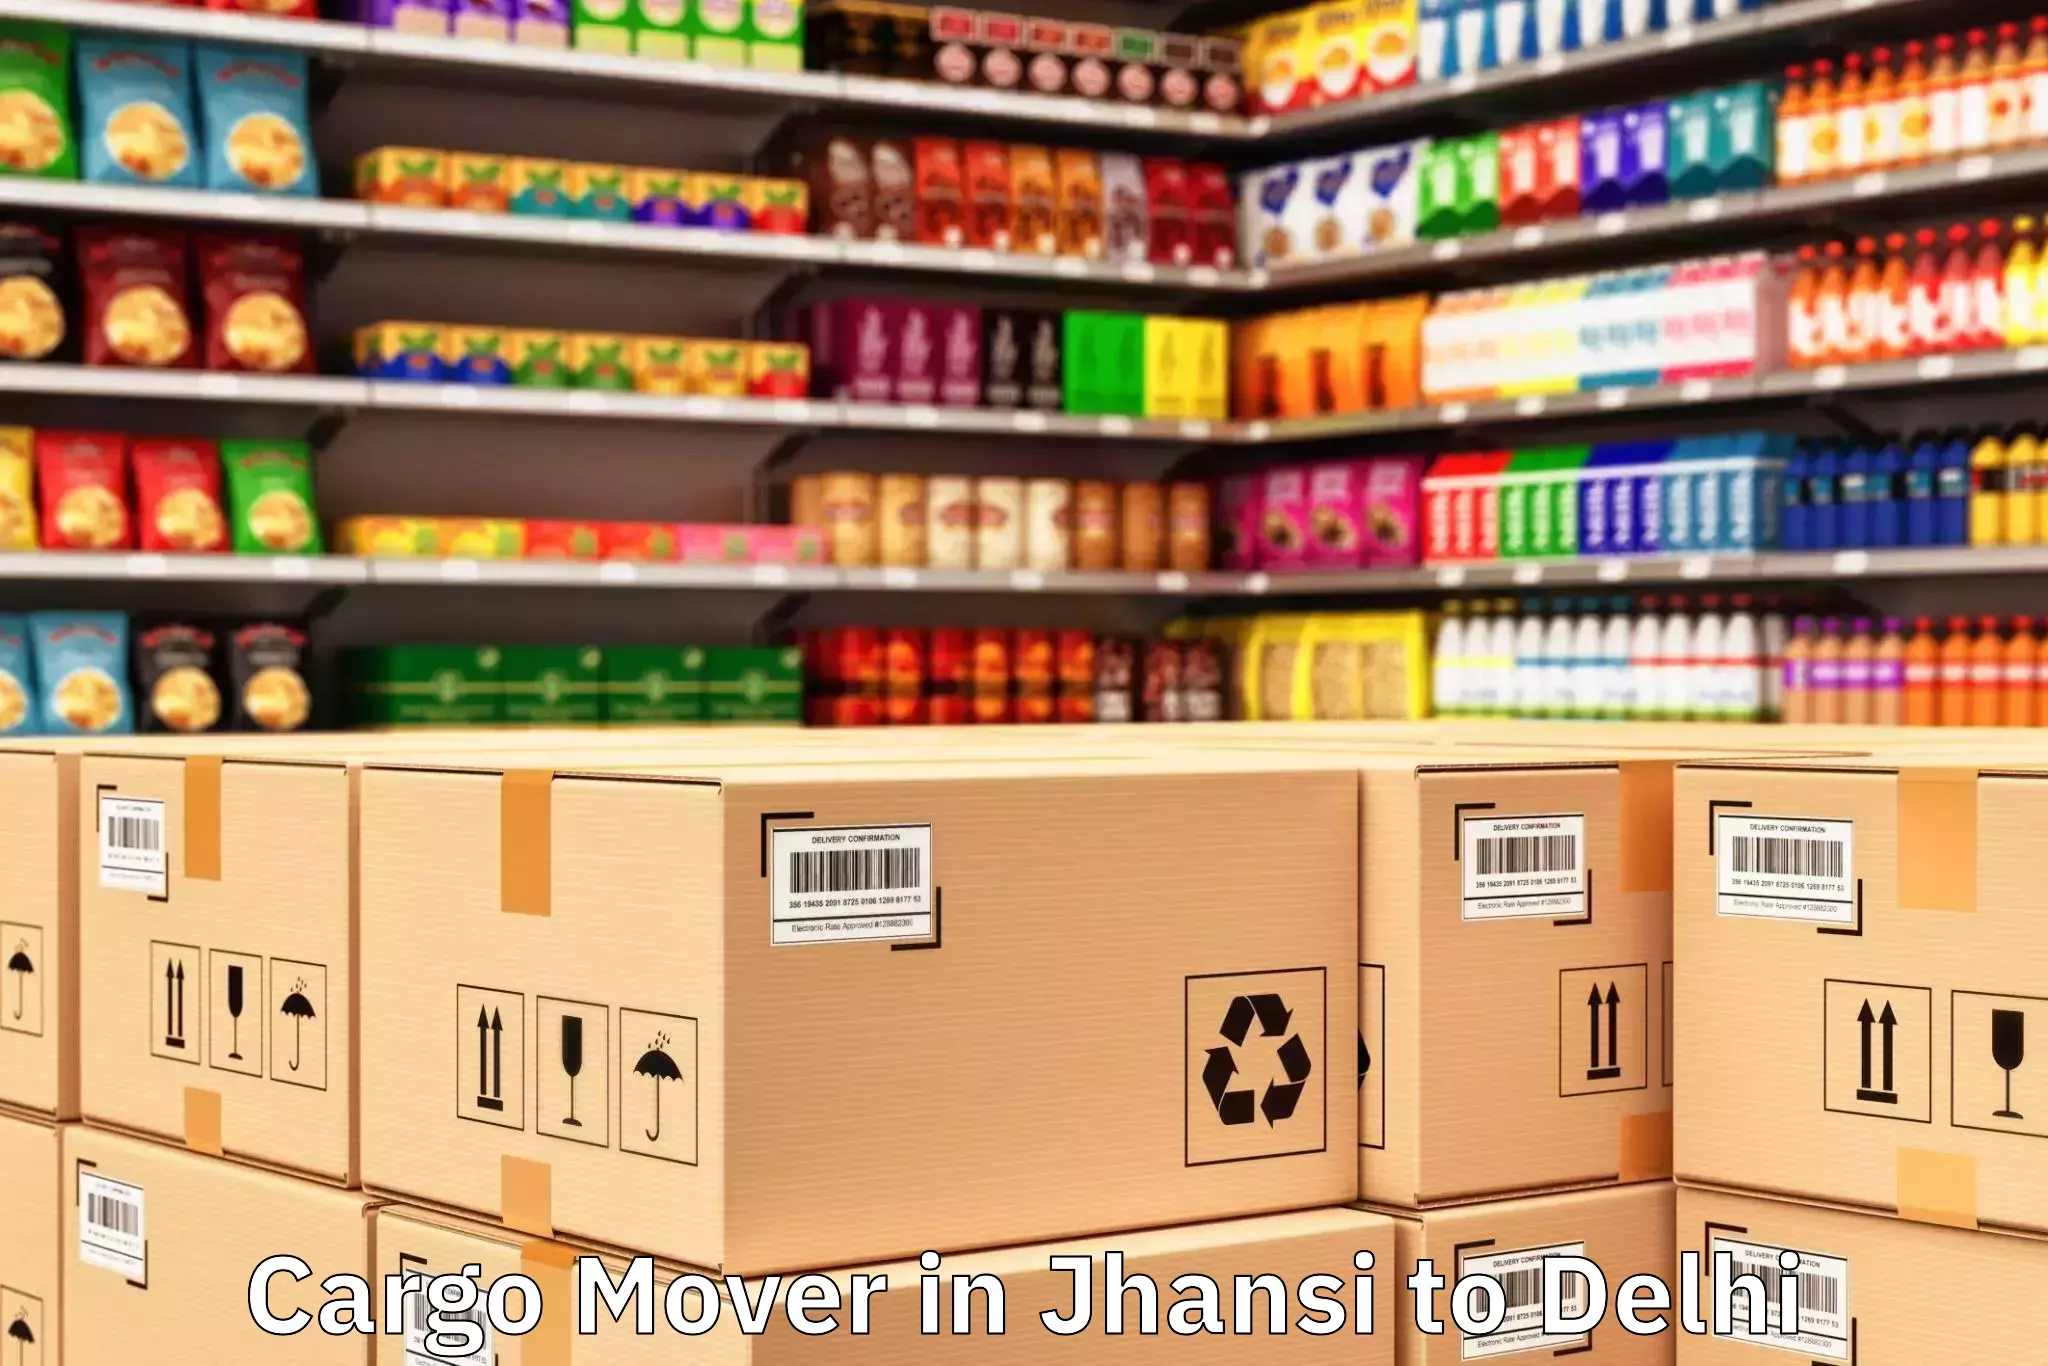 Expert Jhansi to Select Citywalk Mall Cargo Mover